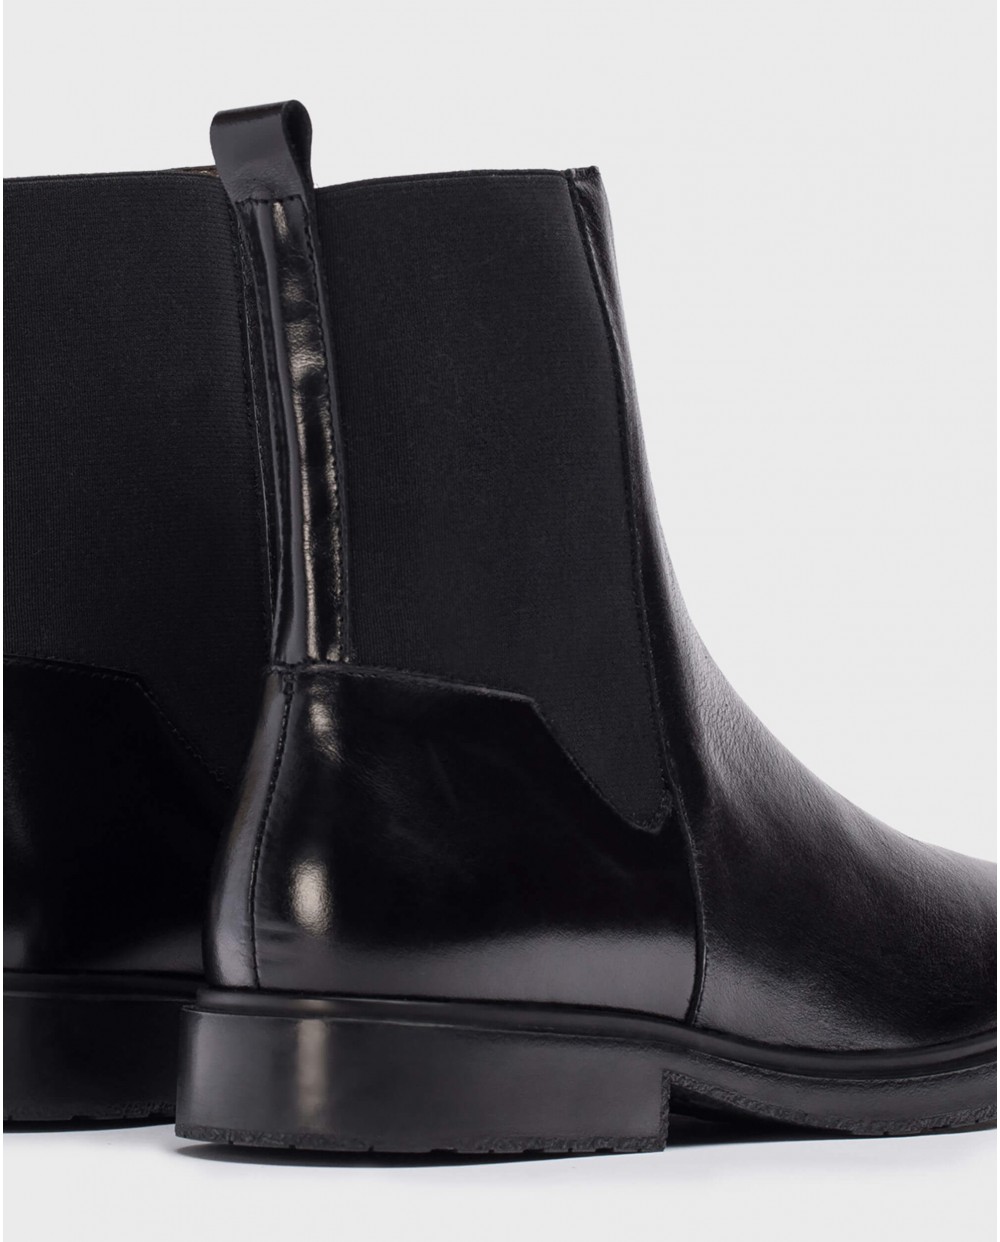 Black SCAR ankle boot